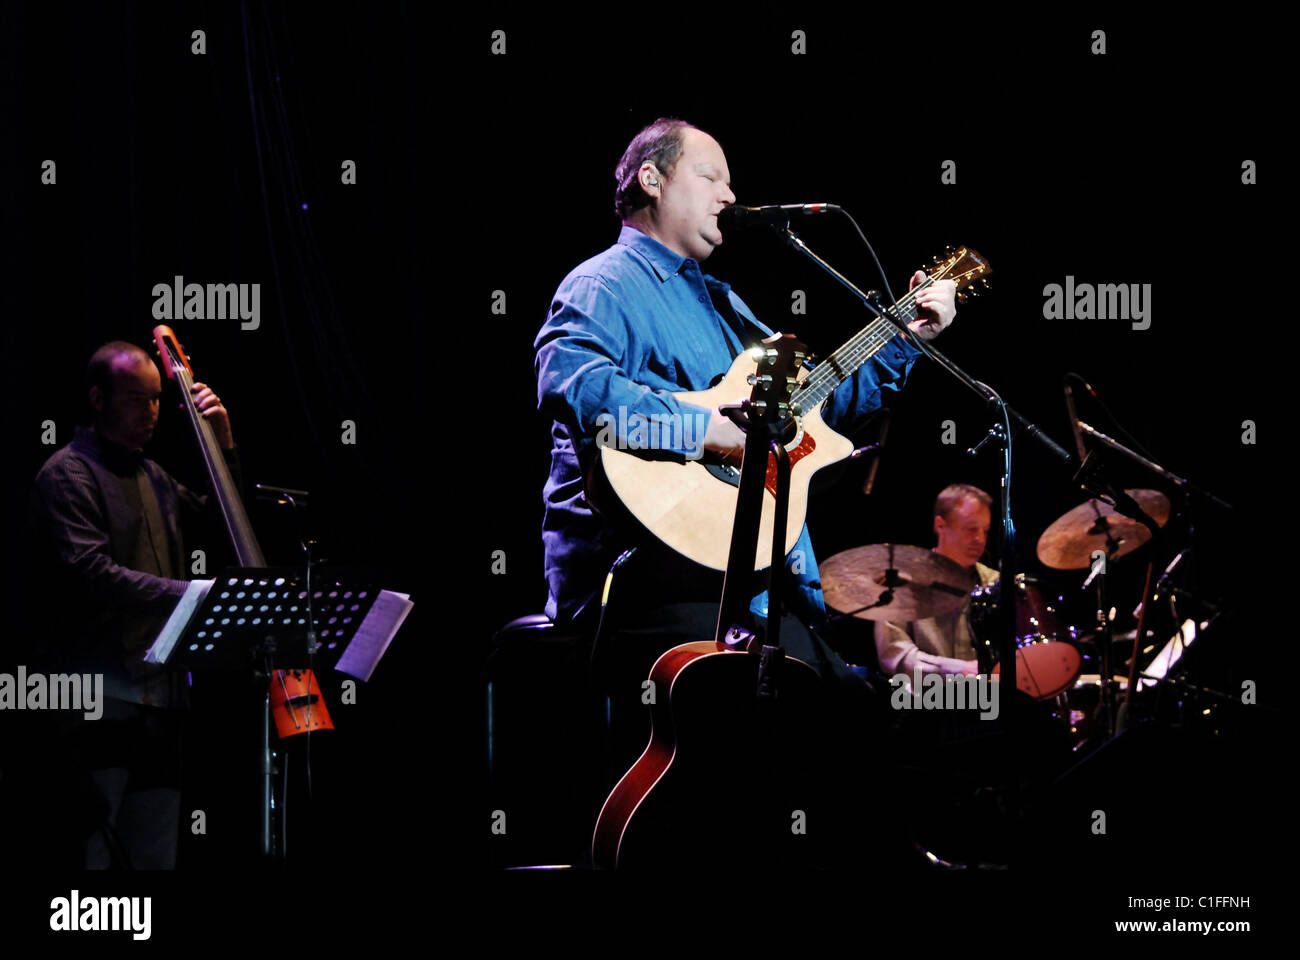 Christopher Cross and his band perform live on stage at the Teatro Gran Rex. Buenos Aires, Argentina - 14.05.09  : .com Stock Photo